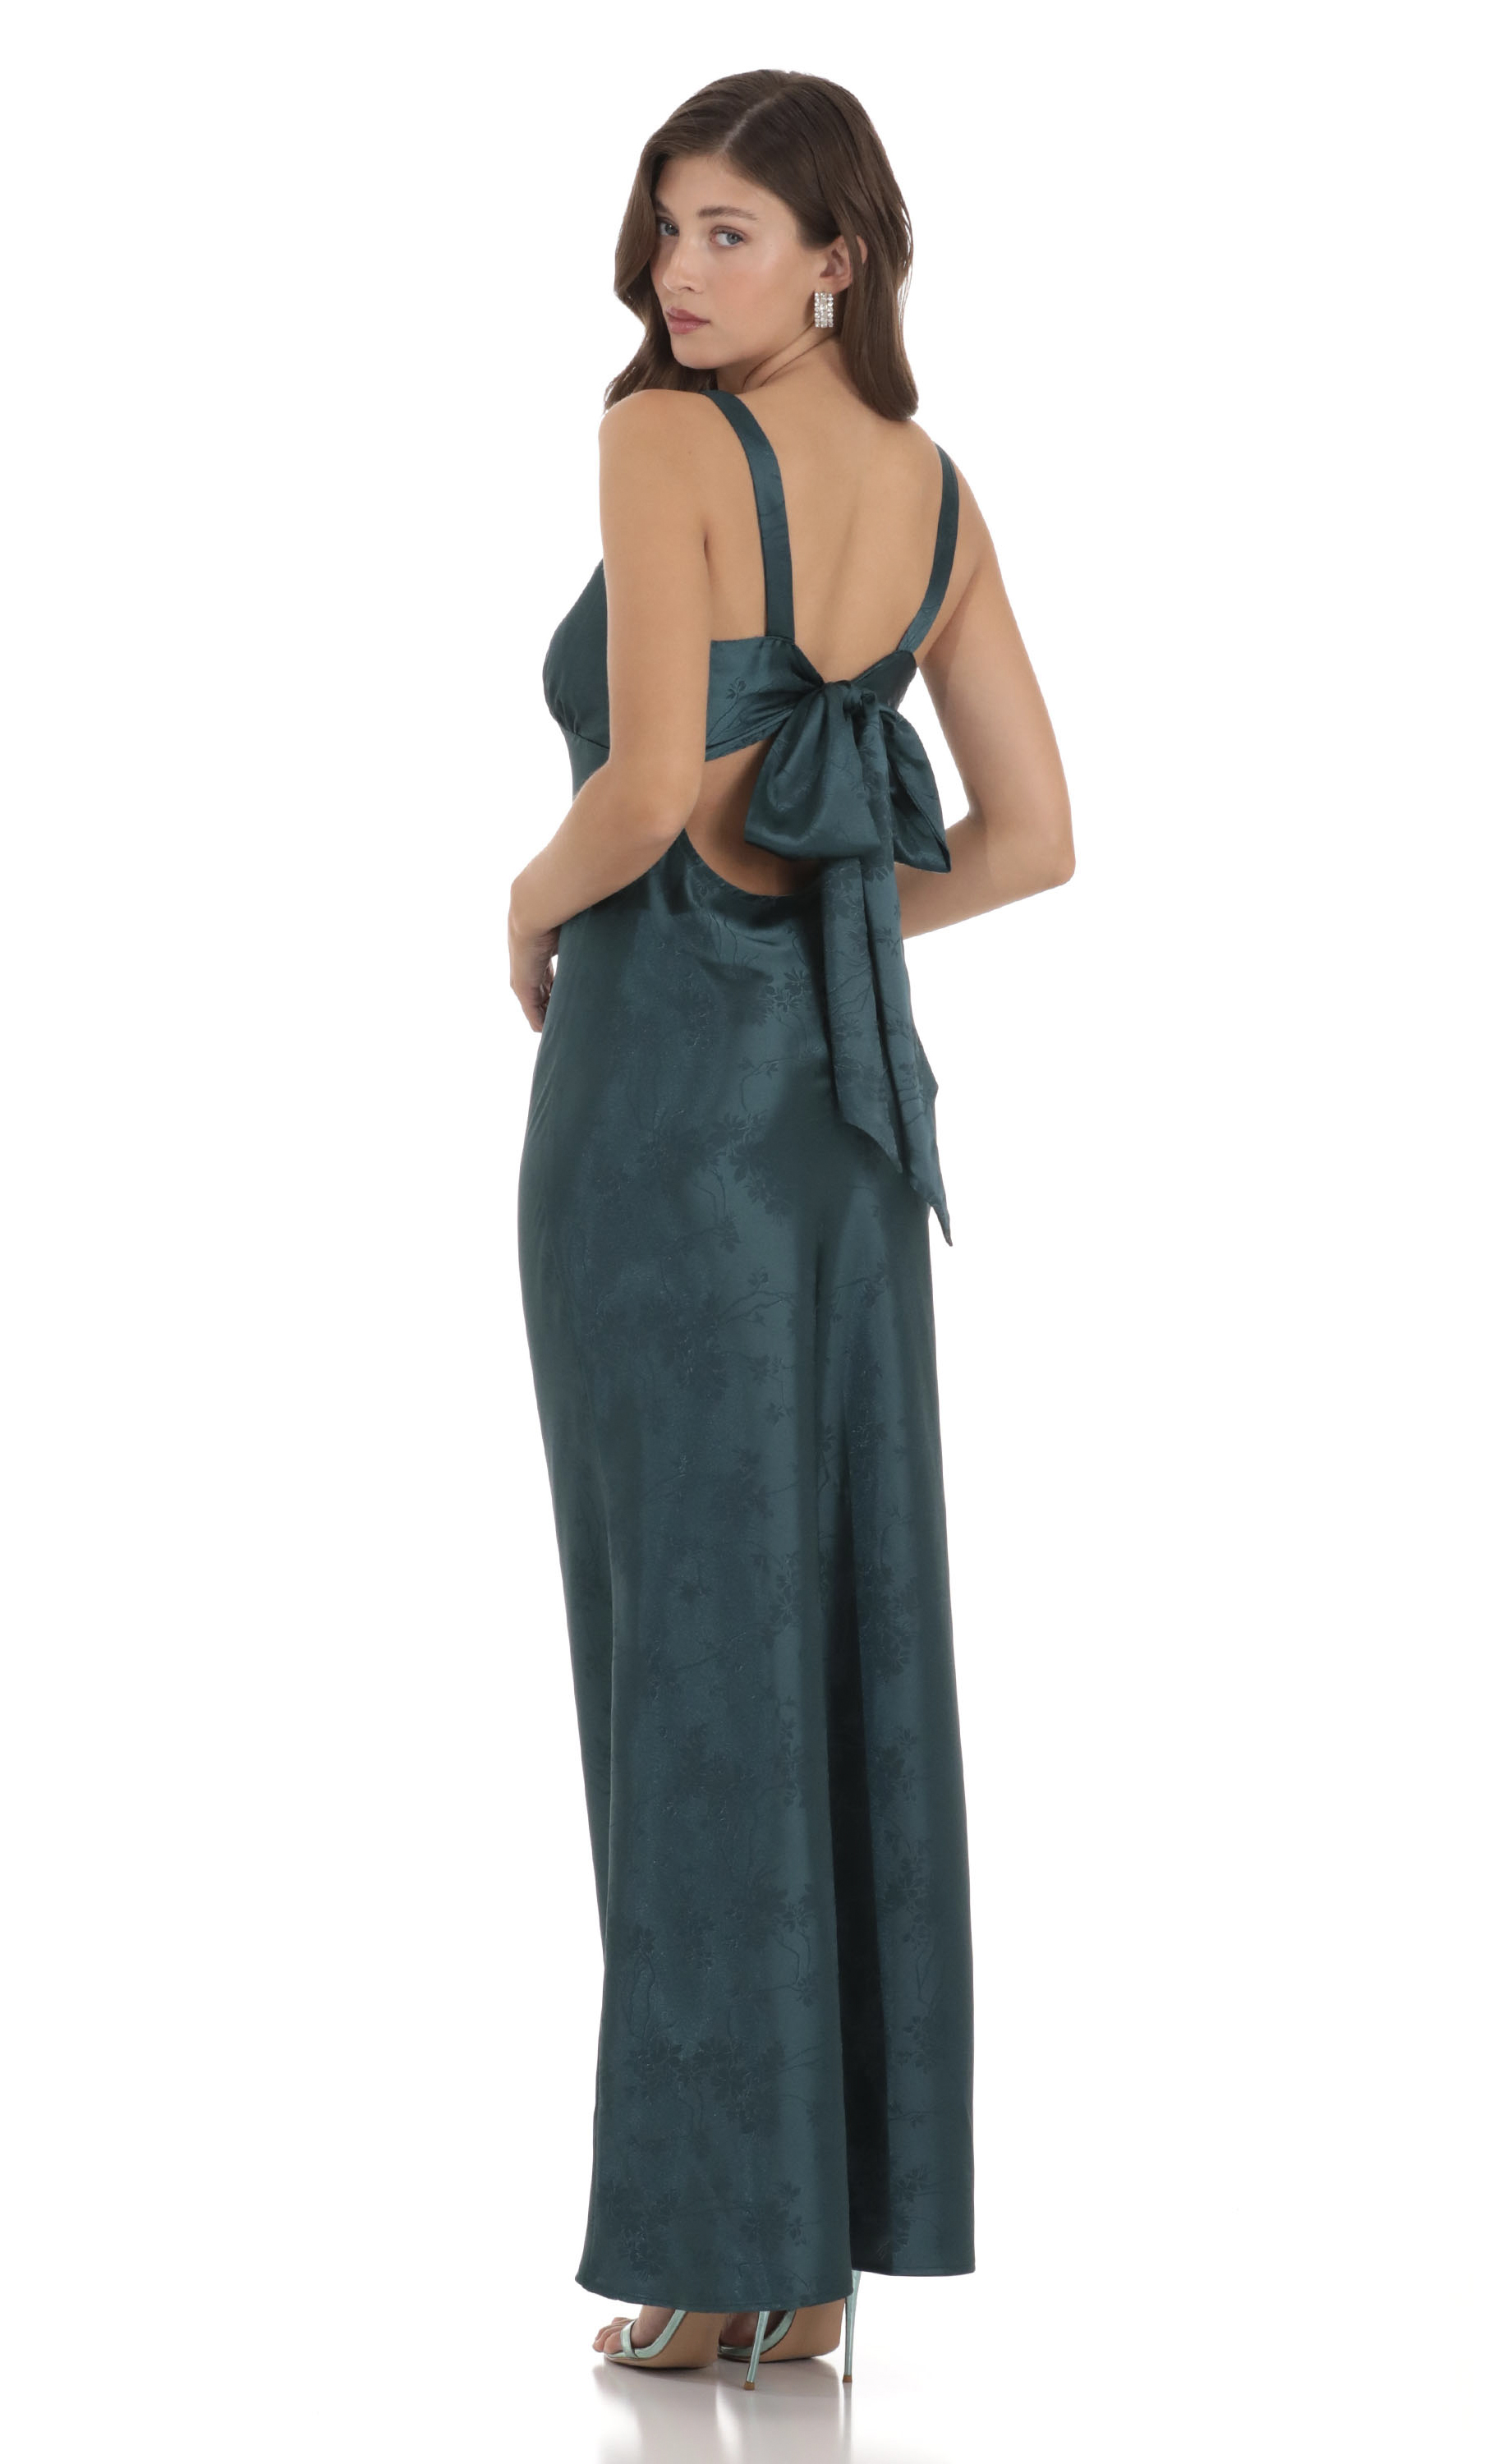 Floral Satin Back Tie Maxi Dress in Teal